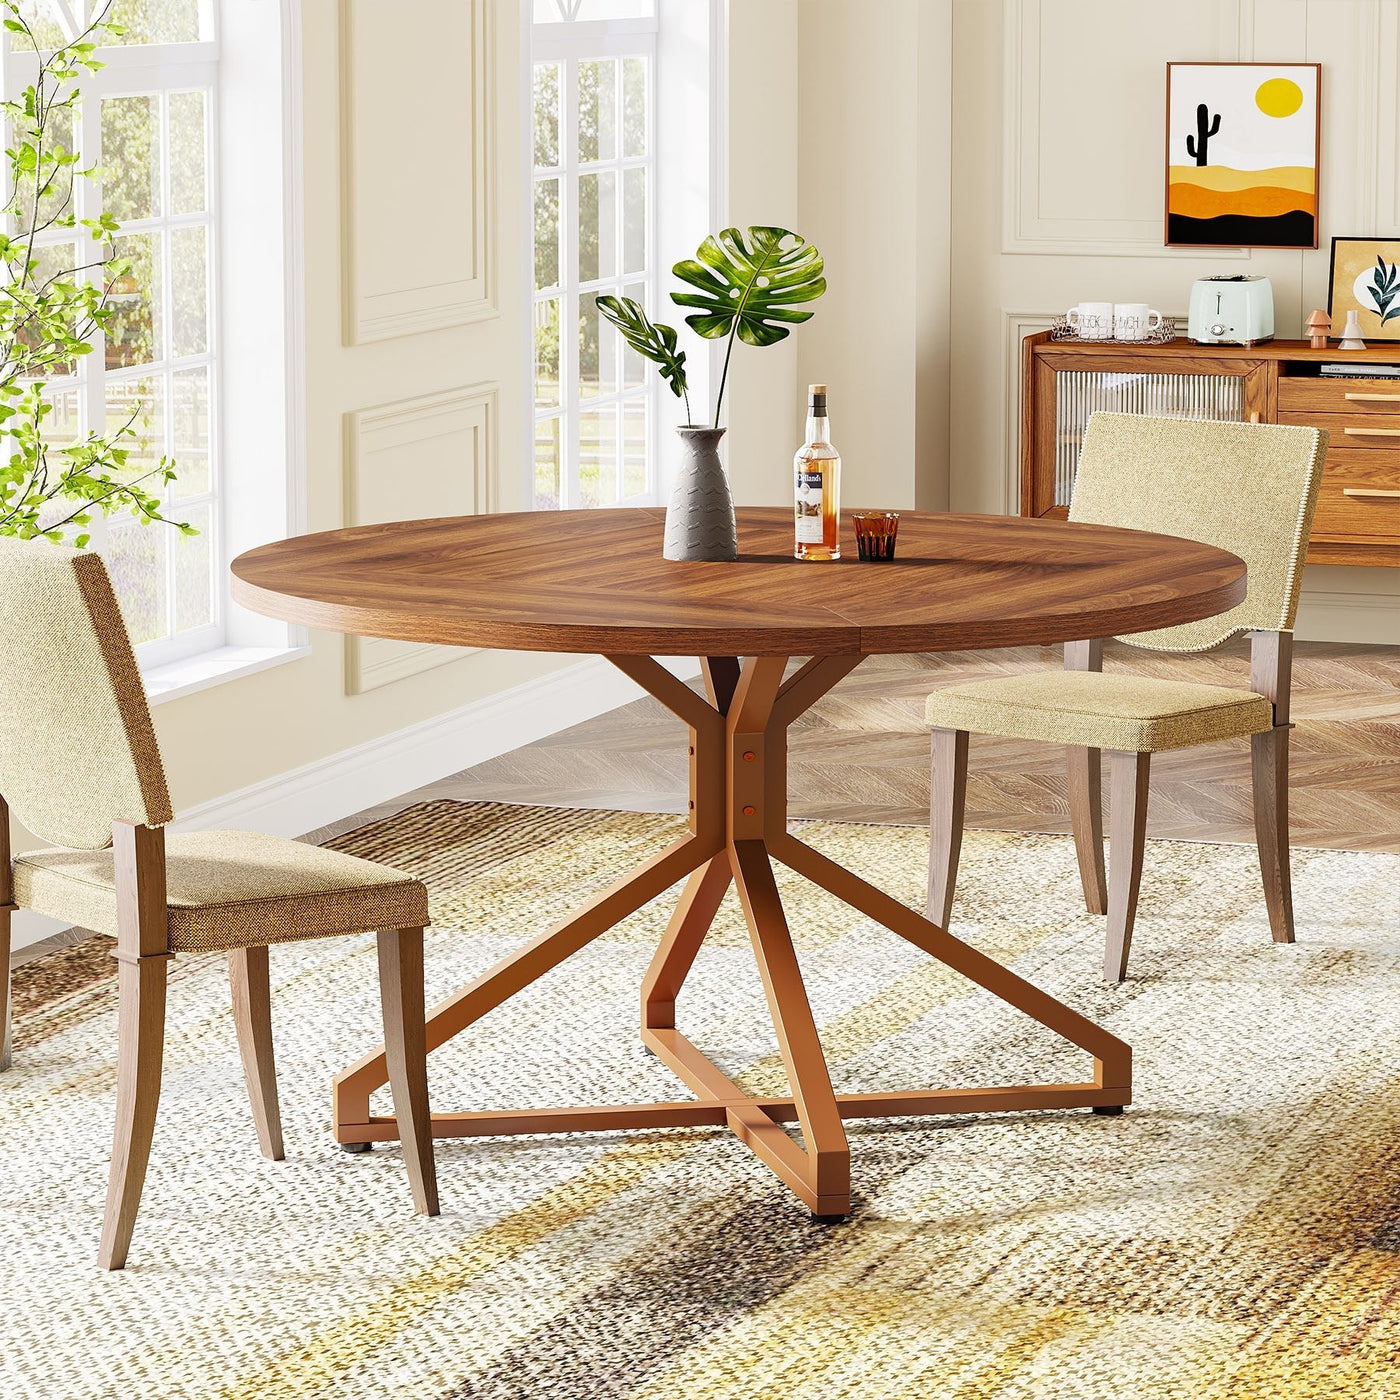 Morale Round Dining Table | 47" Circle Kitchen Table for 4-6 People